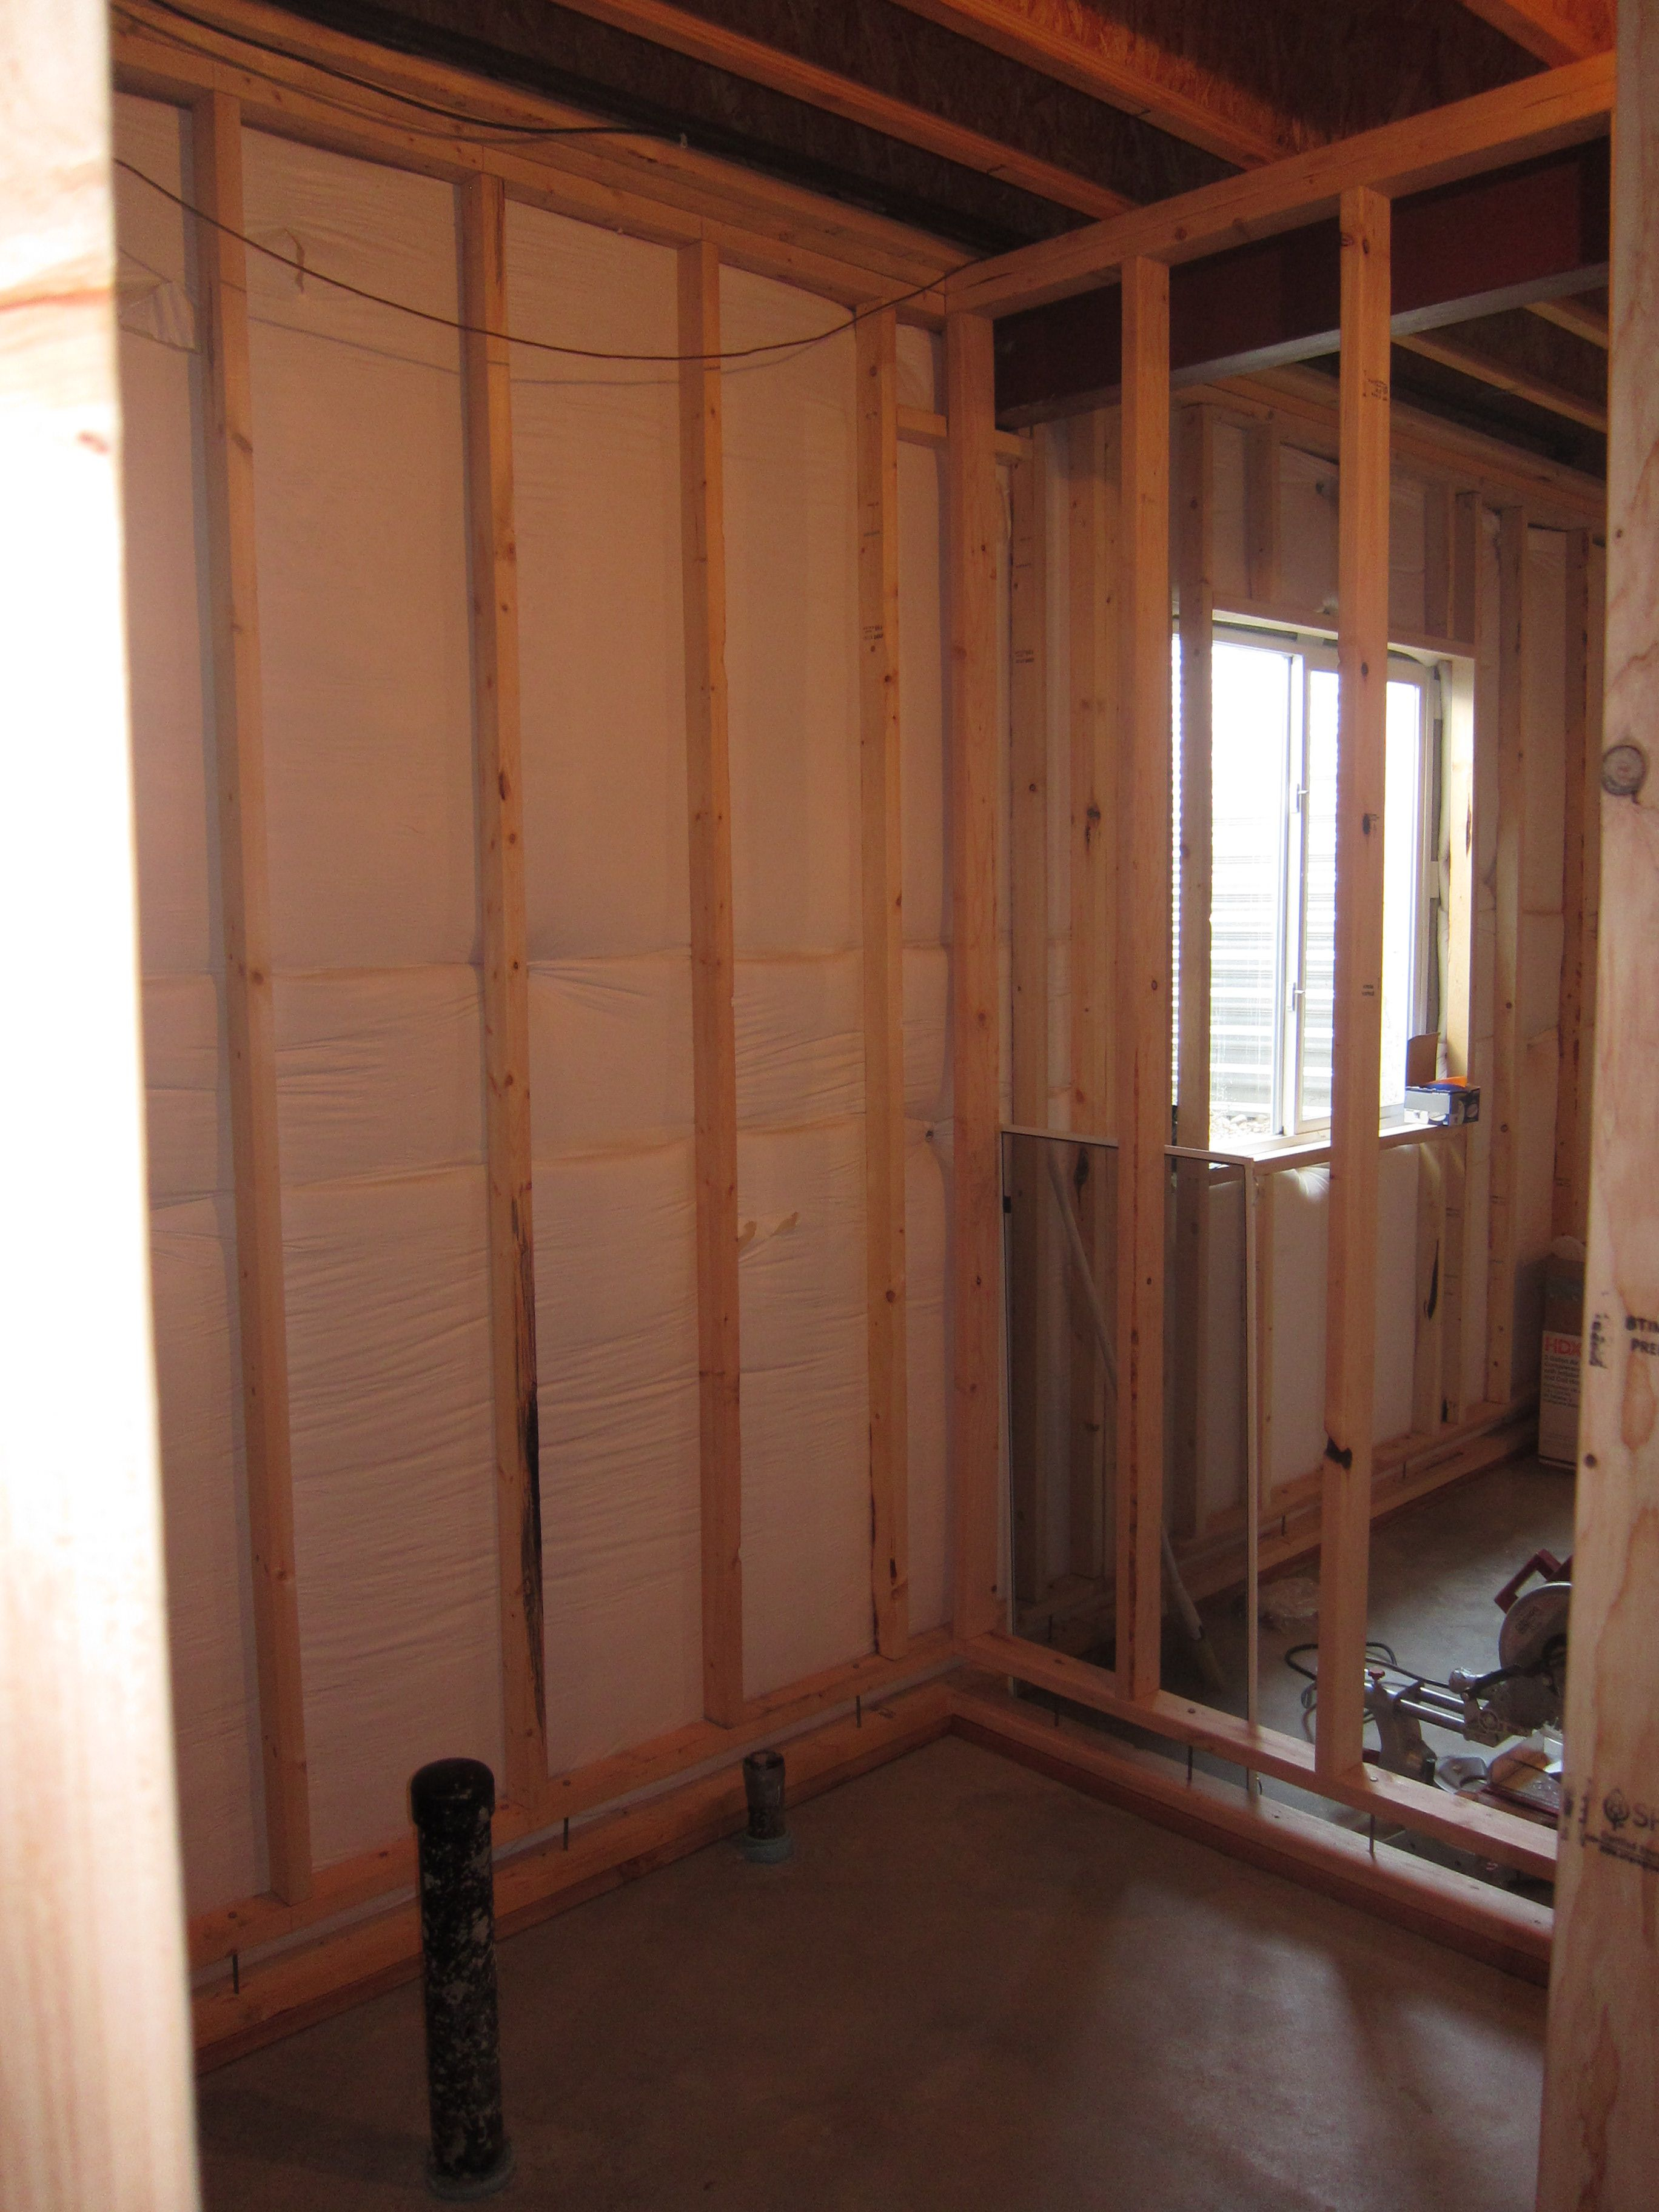 Basement Bathroom With Pex Plumbing And A Rainfall Showerhead within measurements 2736 X 3648